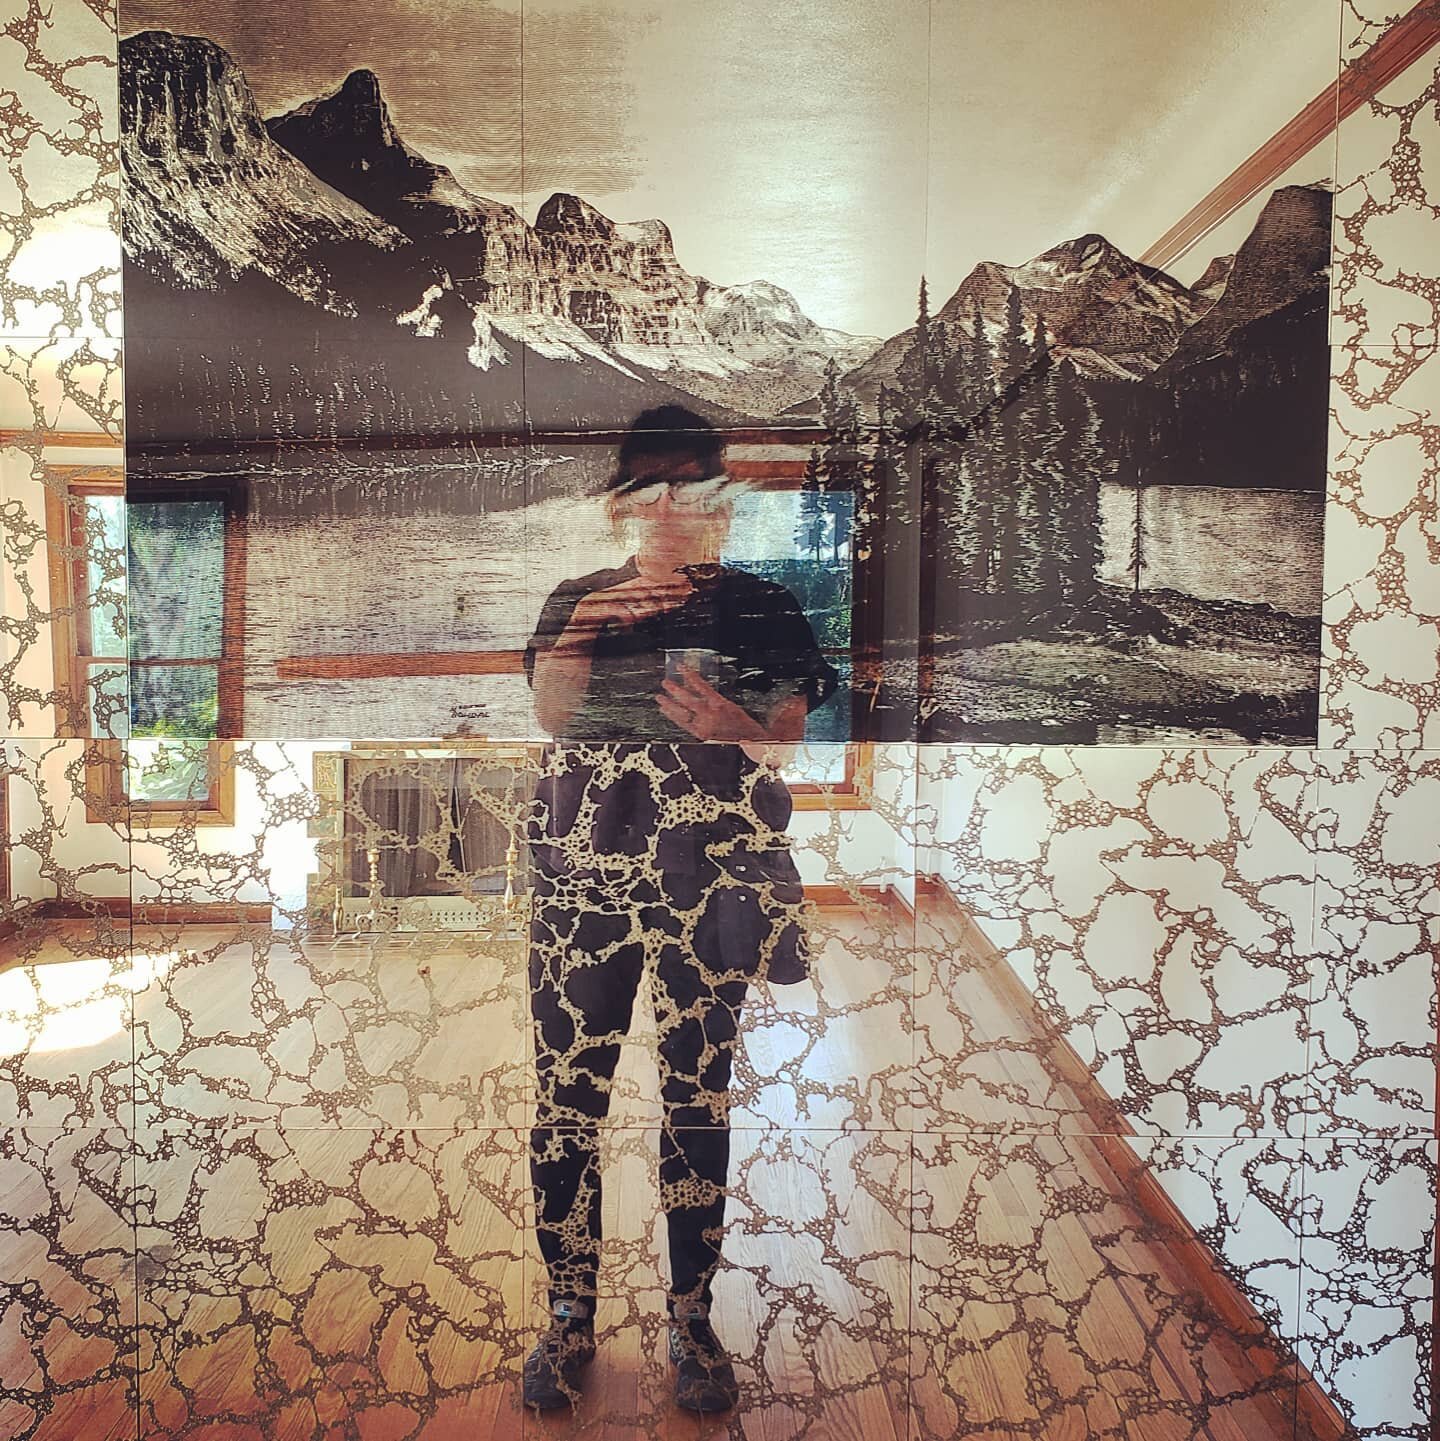 Somewhere between the reality I'm in and where I would like to be, resides this place between. I like it. I might stay.
.
.
@scifisol_music @senorfrio 
#mirror #magic #mythicalmountain #thiswallisakeeper #oldhousecharm #vintagemirror #mirrortile #old